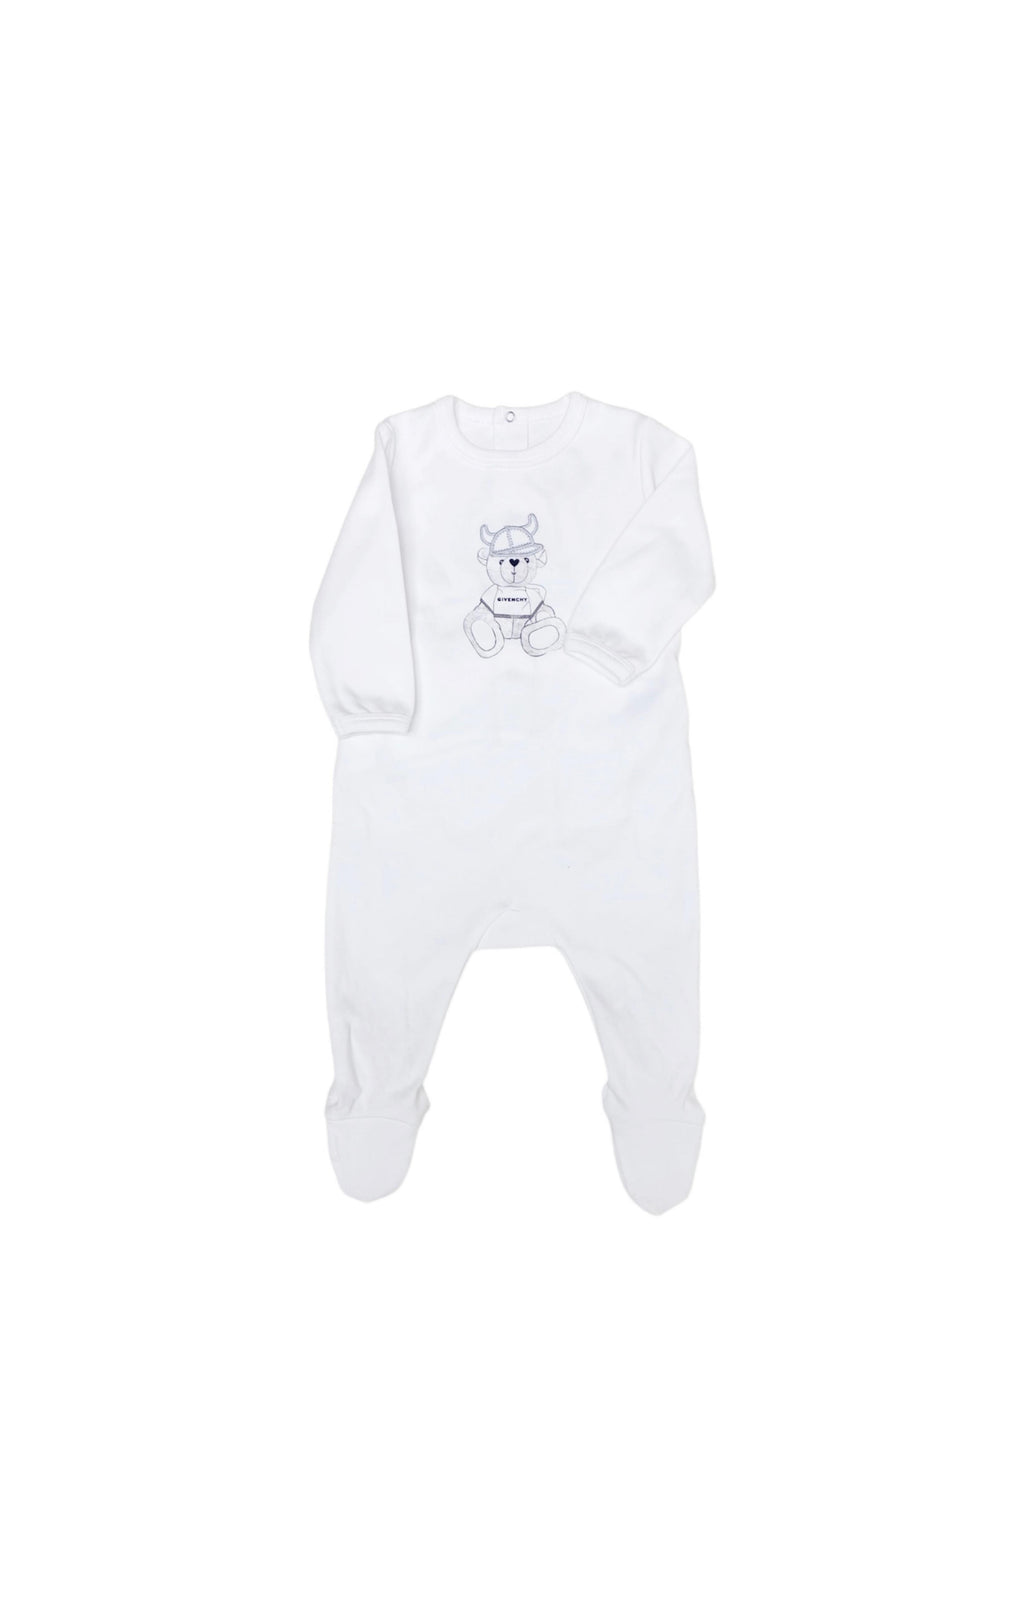 GIVENCHY (RARE) Onesie Size: 3 Months